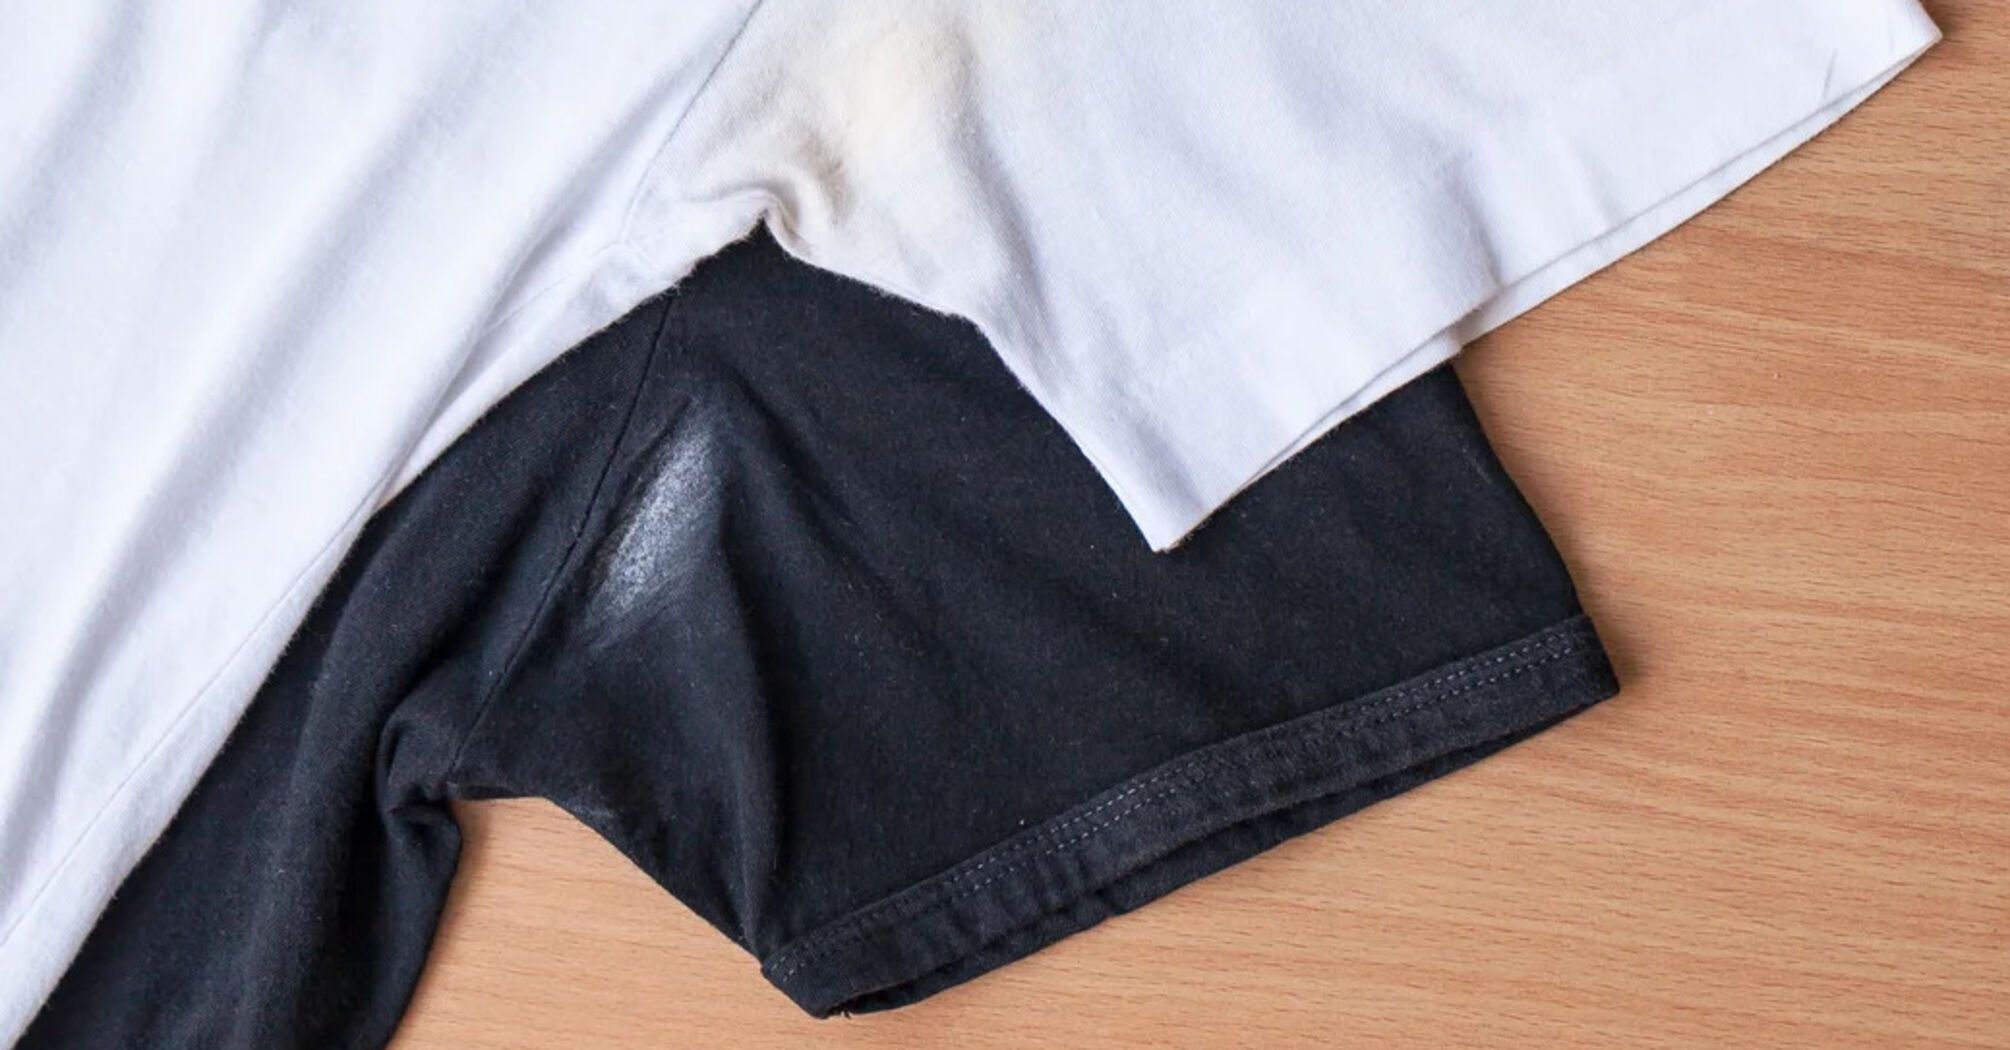 How to get rid of deodorant stains from clothes